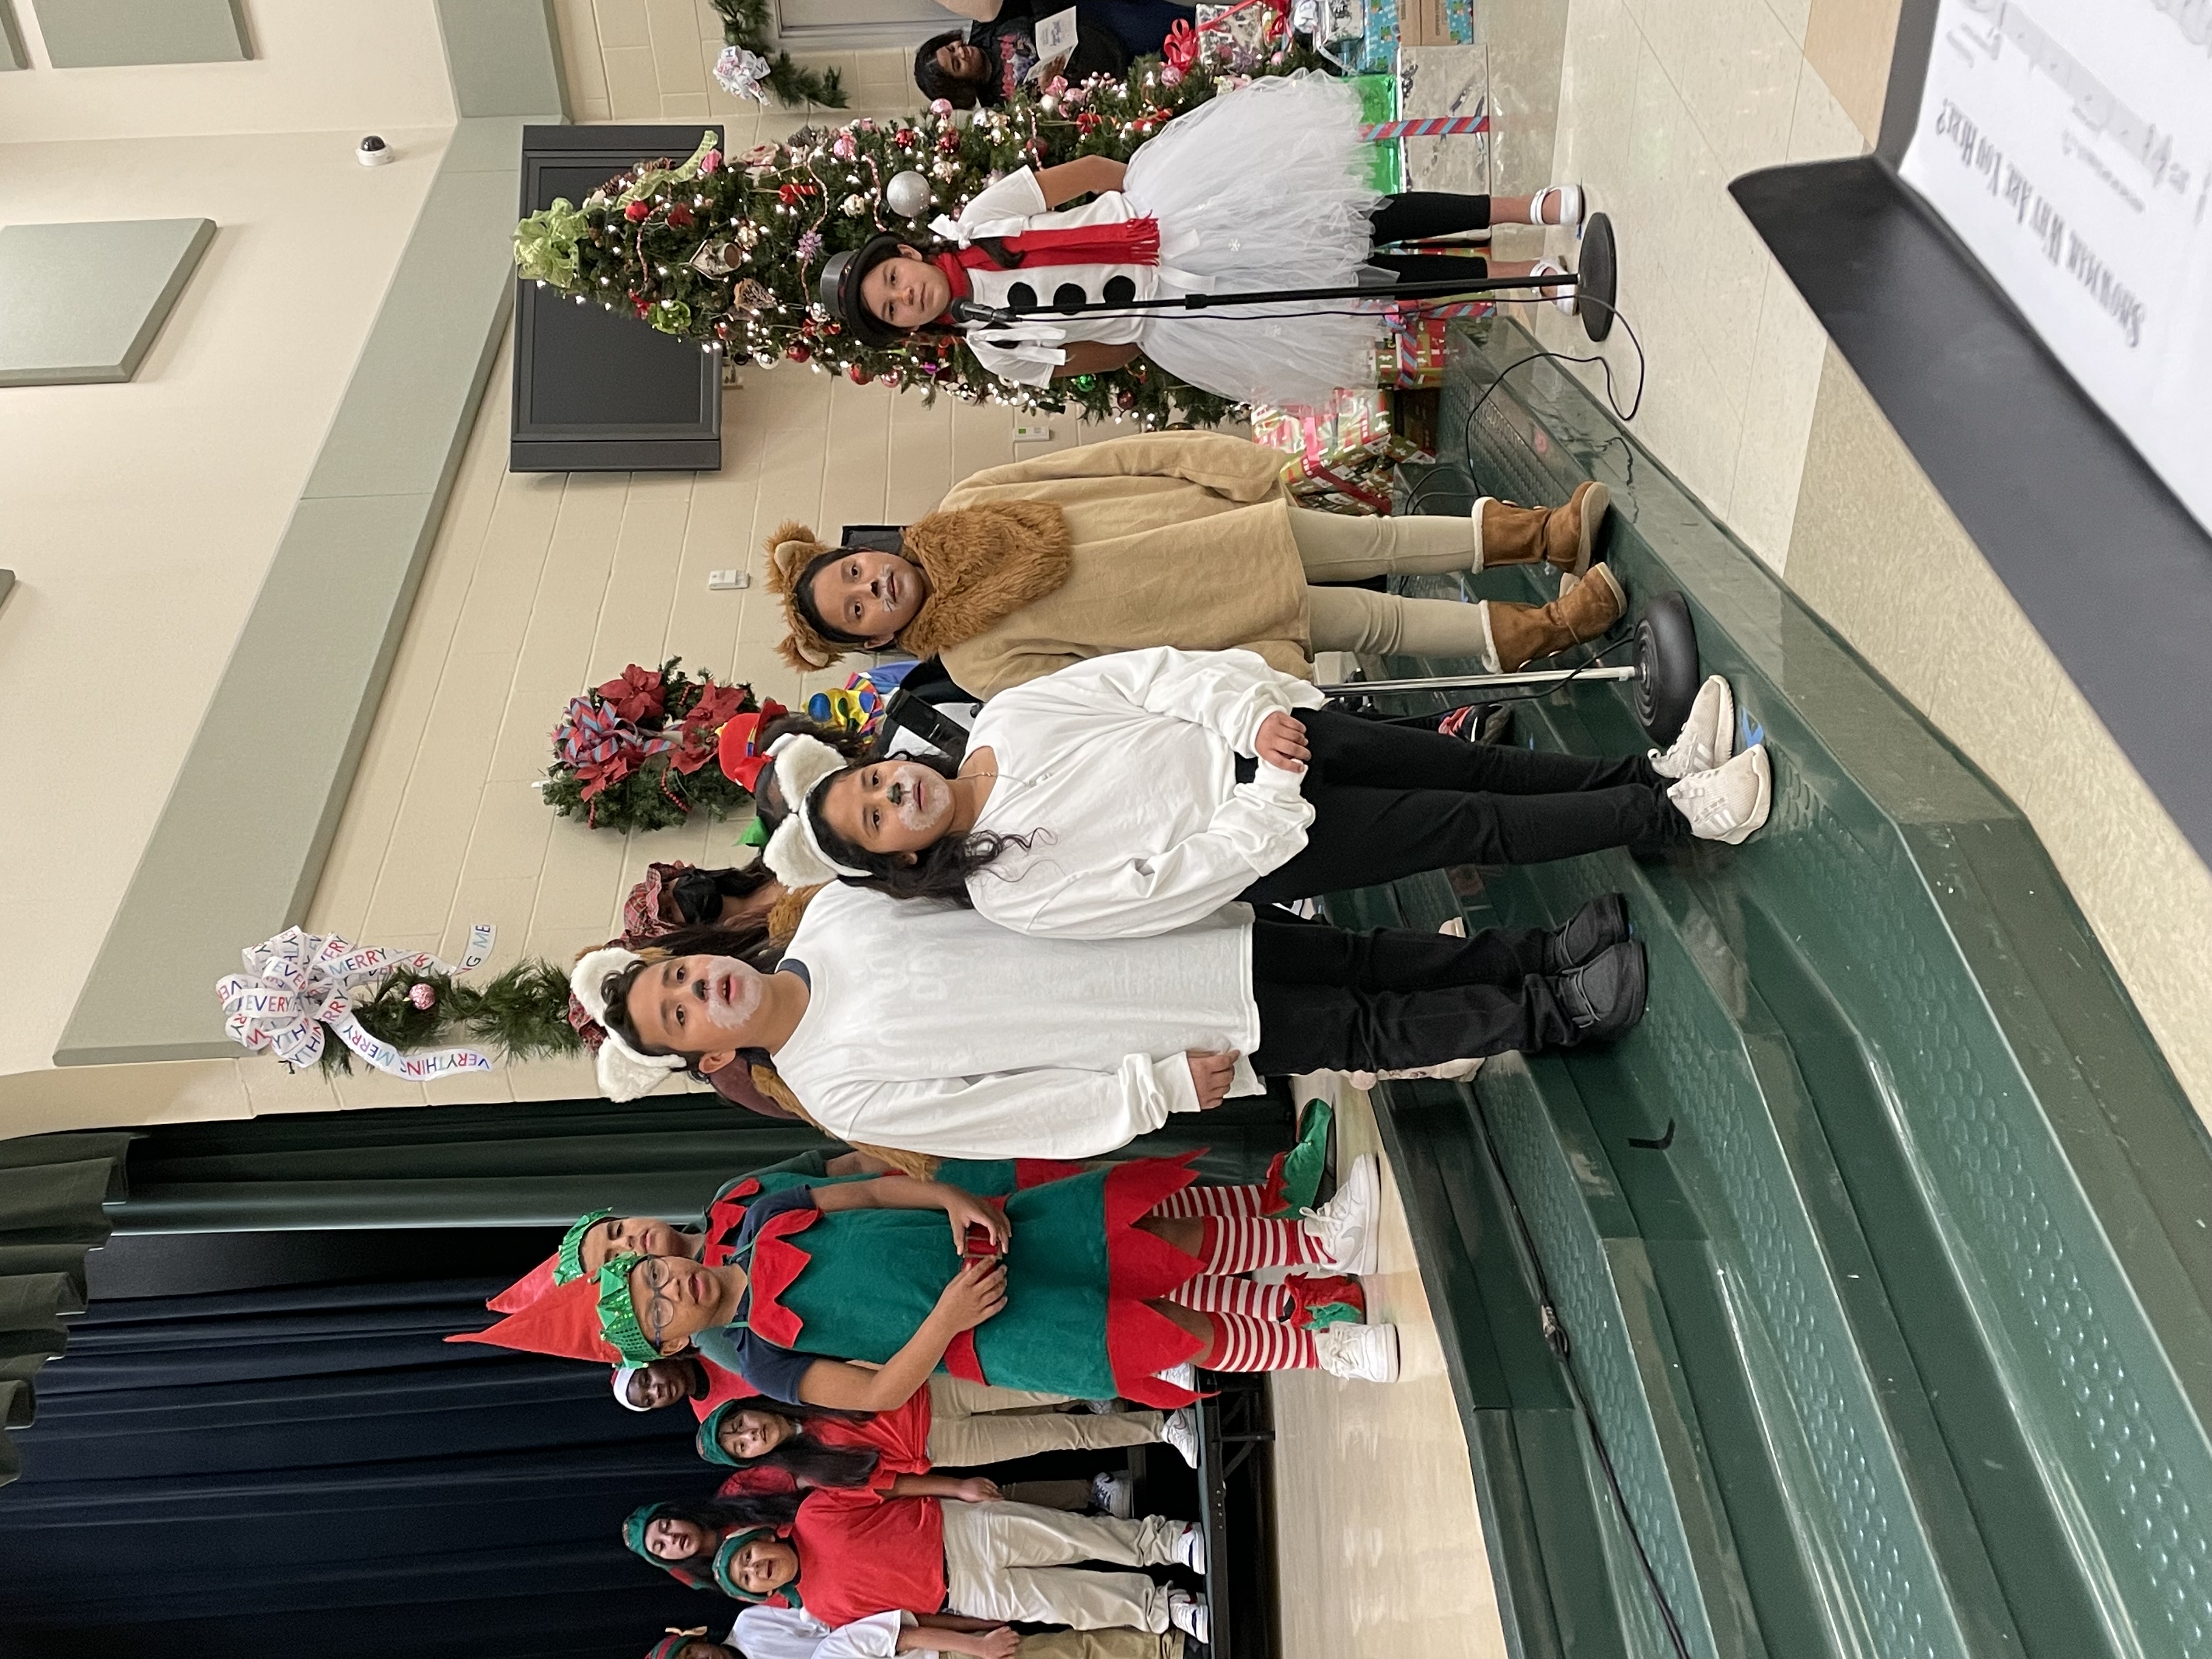 elementary aged kids dressed as reindeer, elves and Frosty the snowman